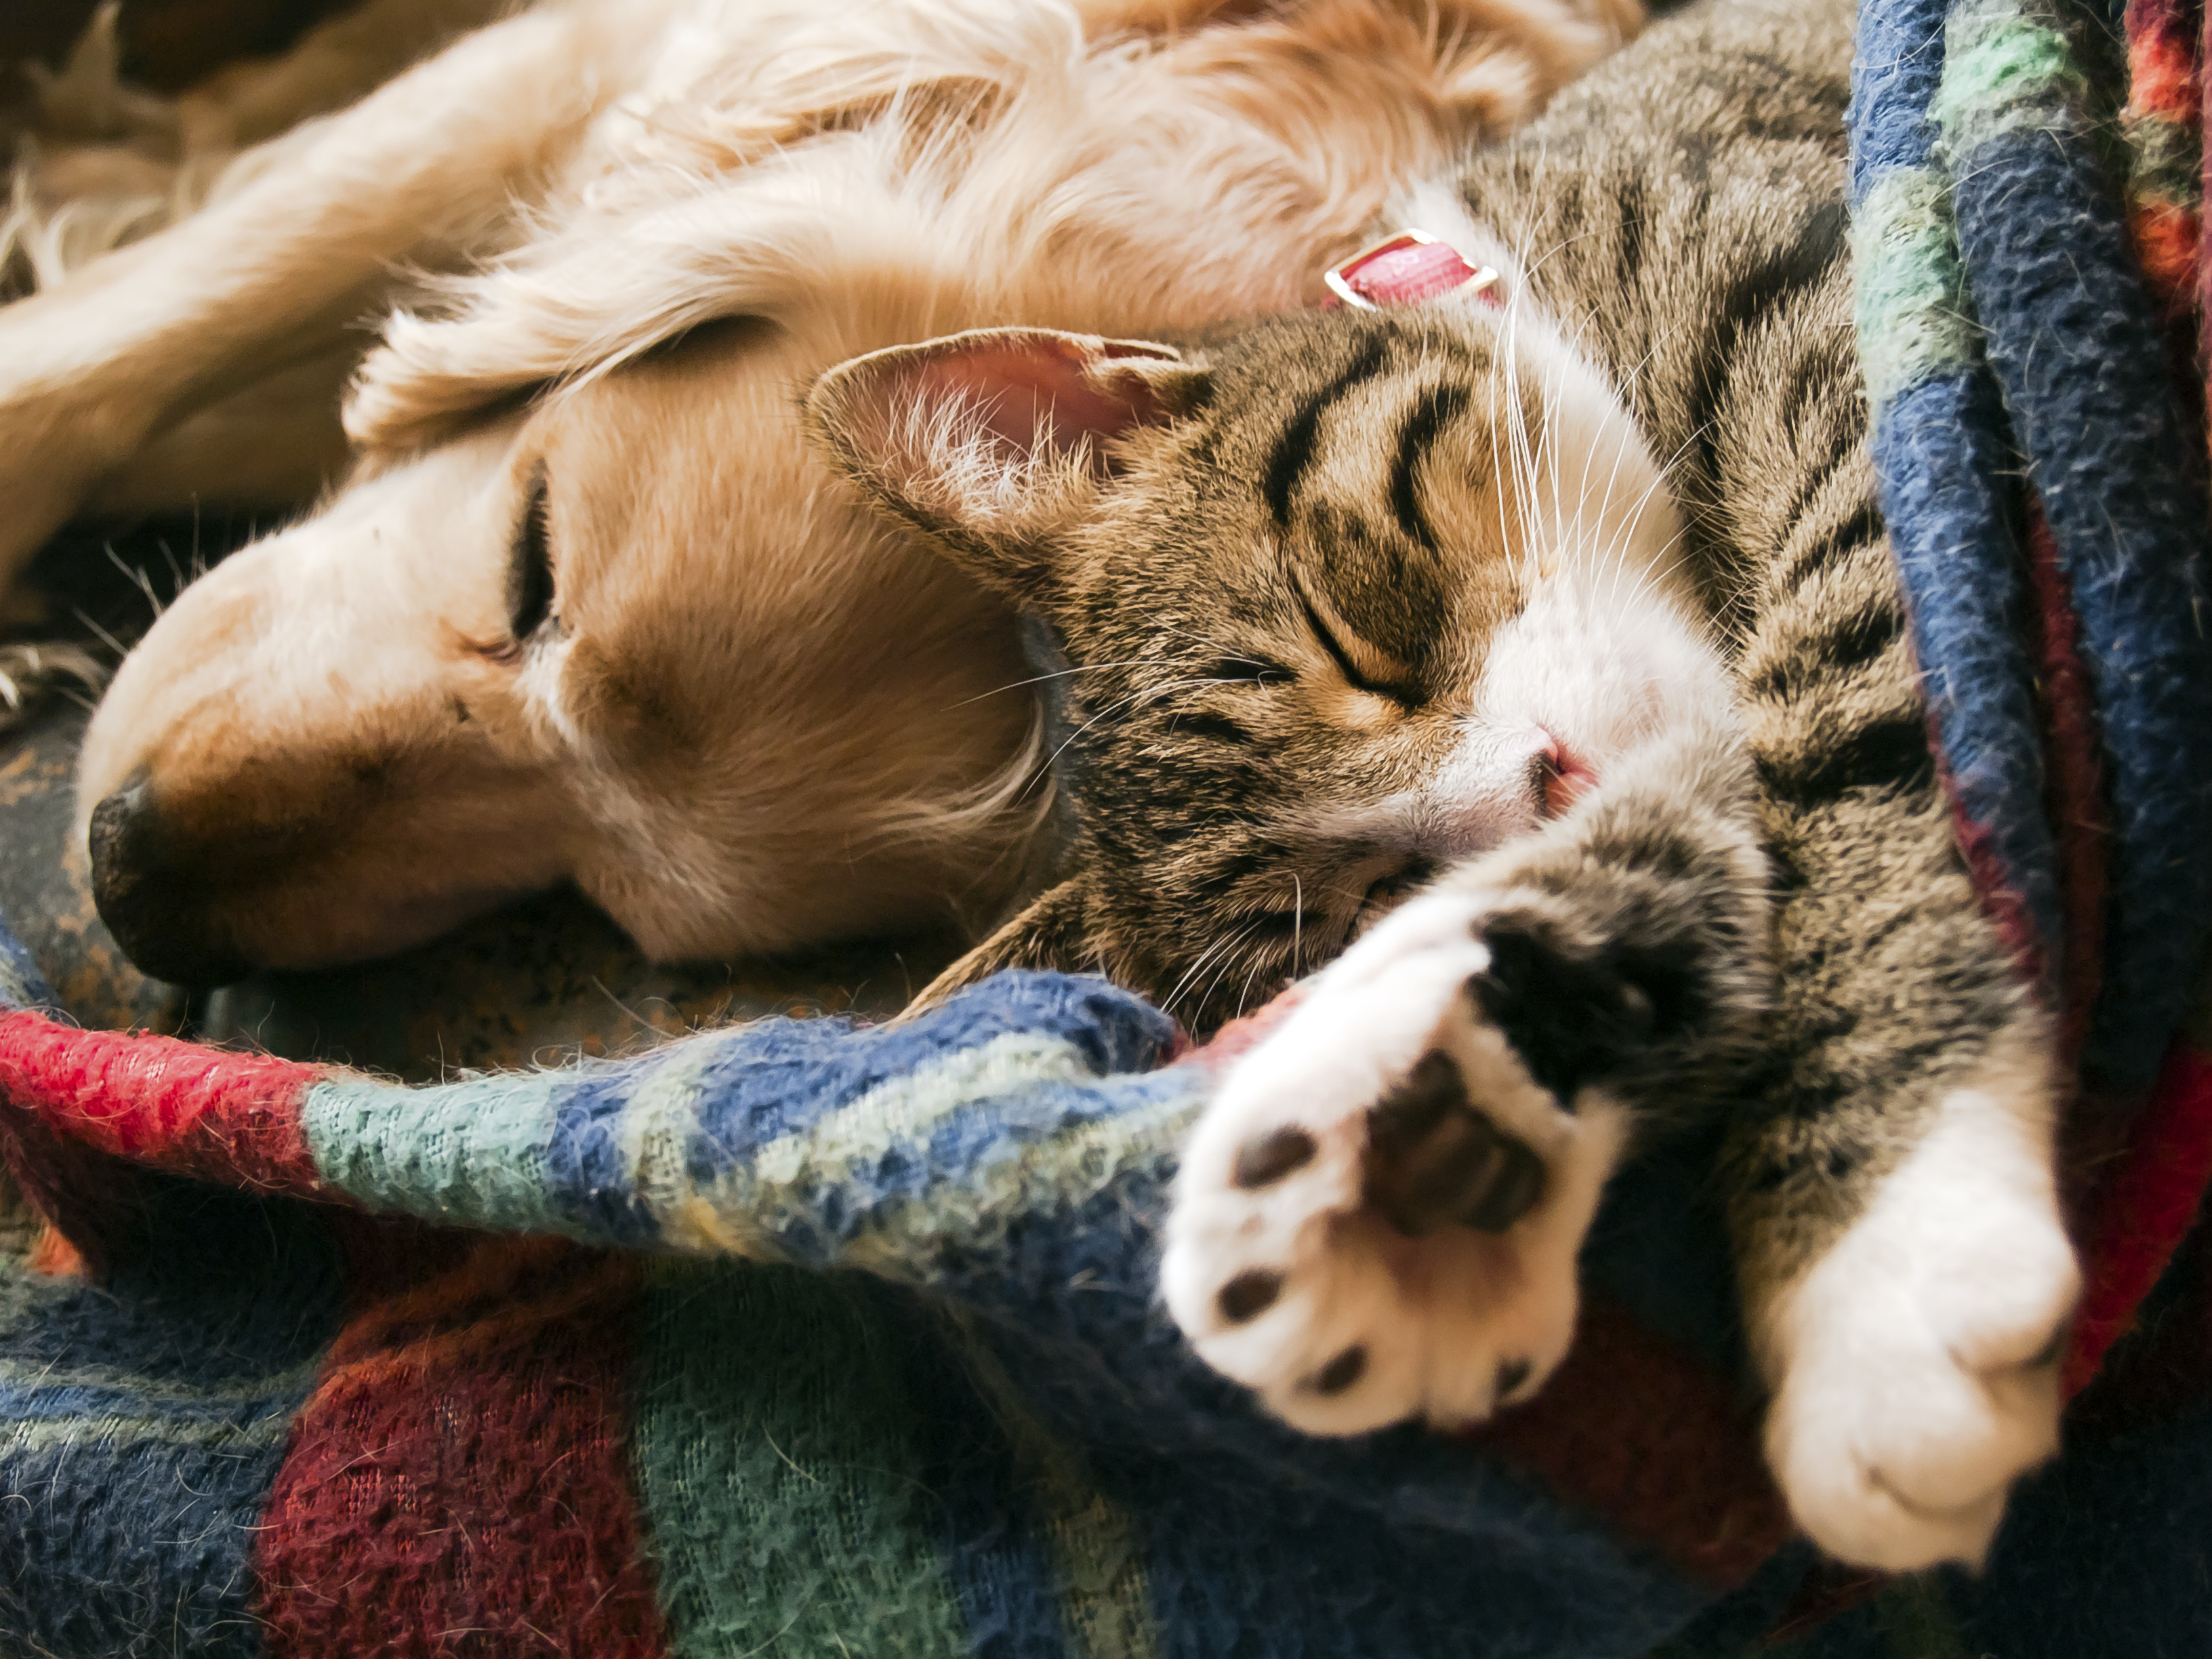 A brown and white cat sleeping closely to a golden retriever in a blue and red blanket.